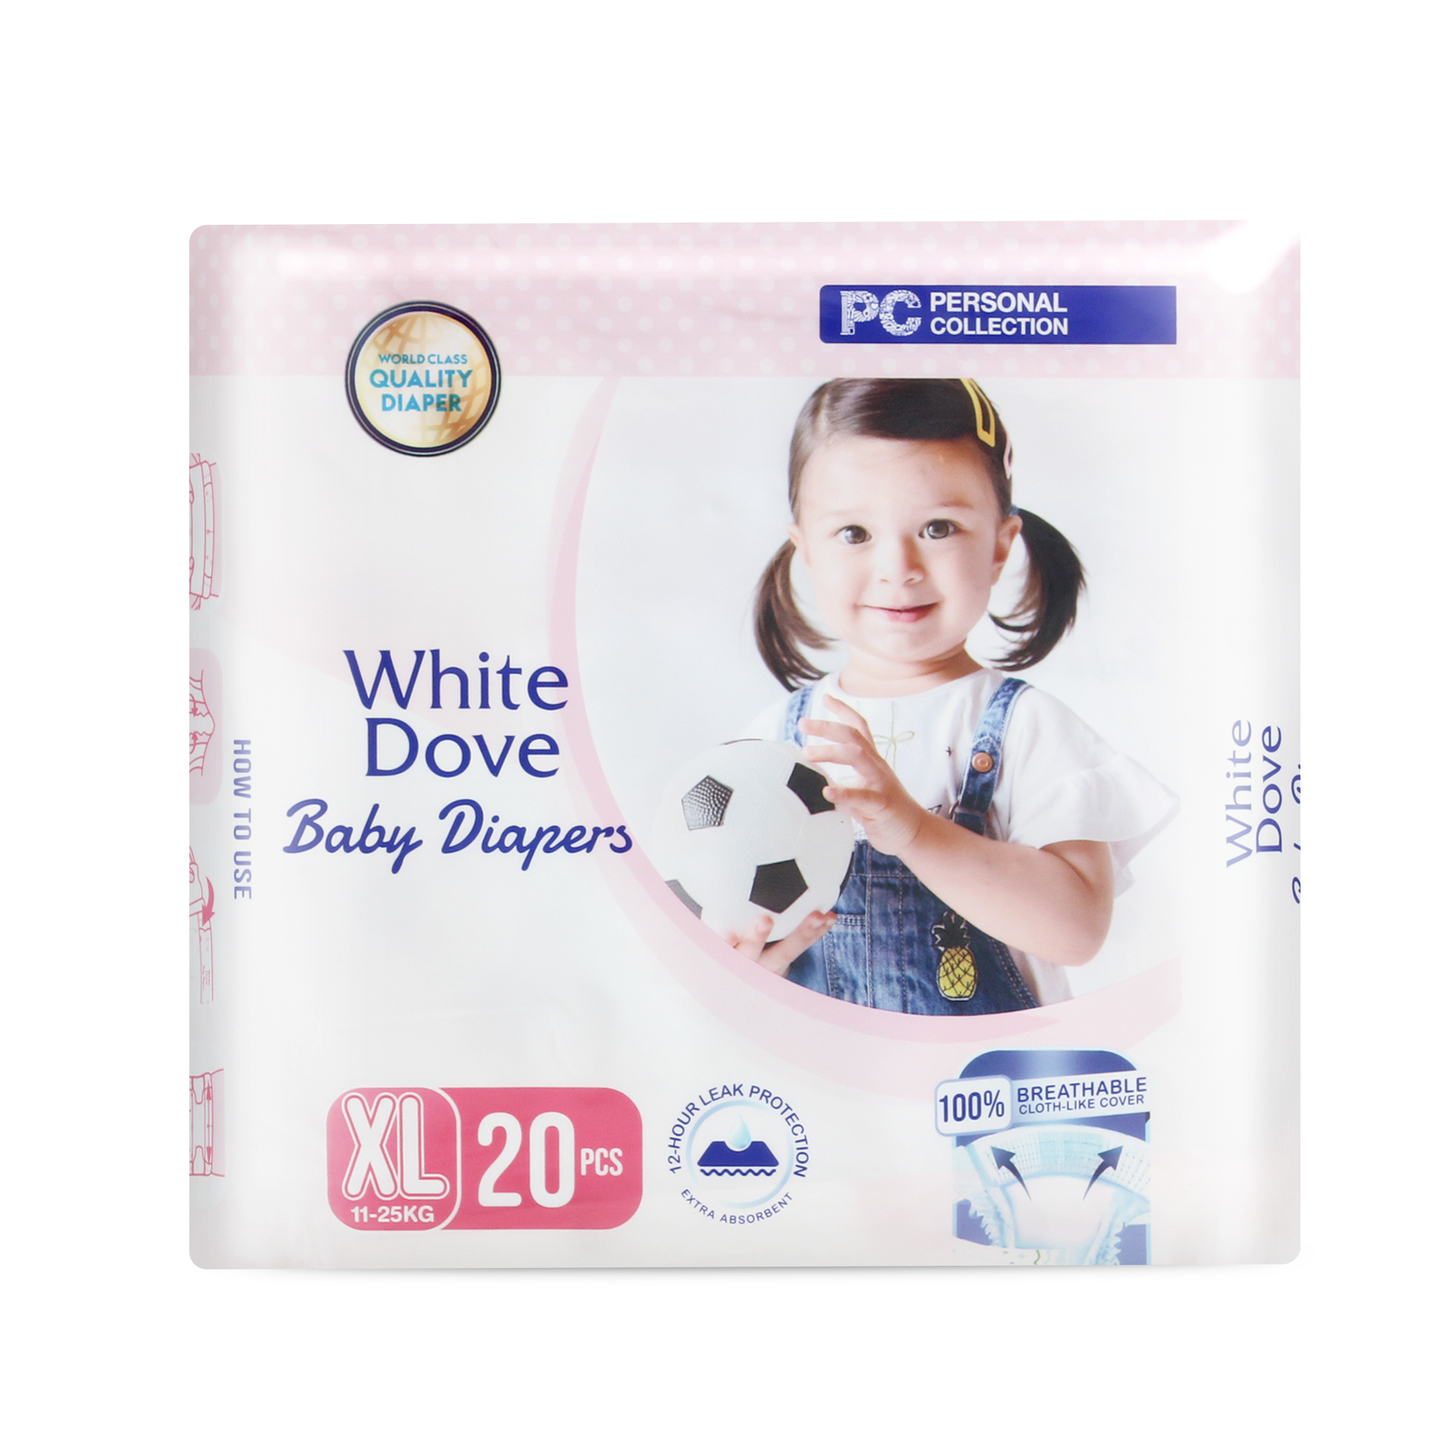 White Dove Baby Diaper Extra Large Pack of 20's